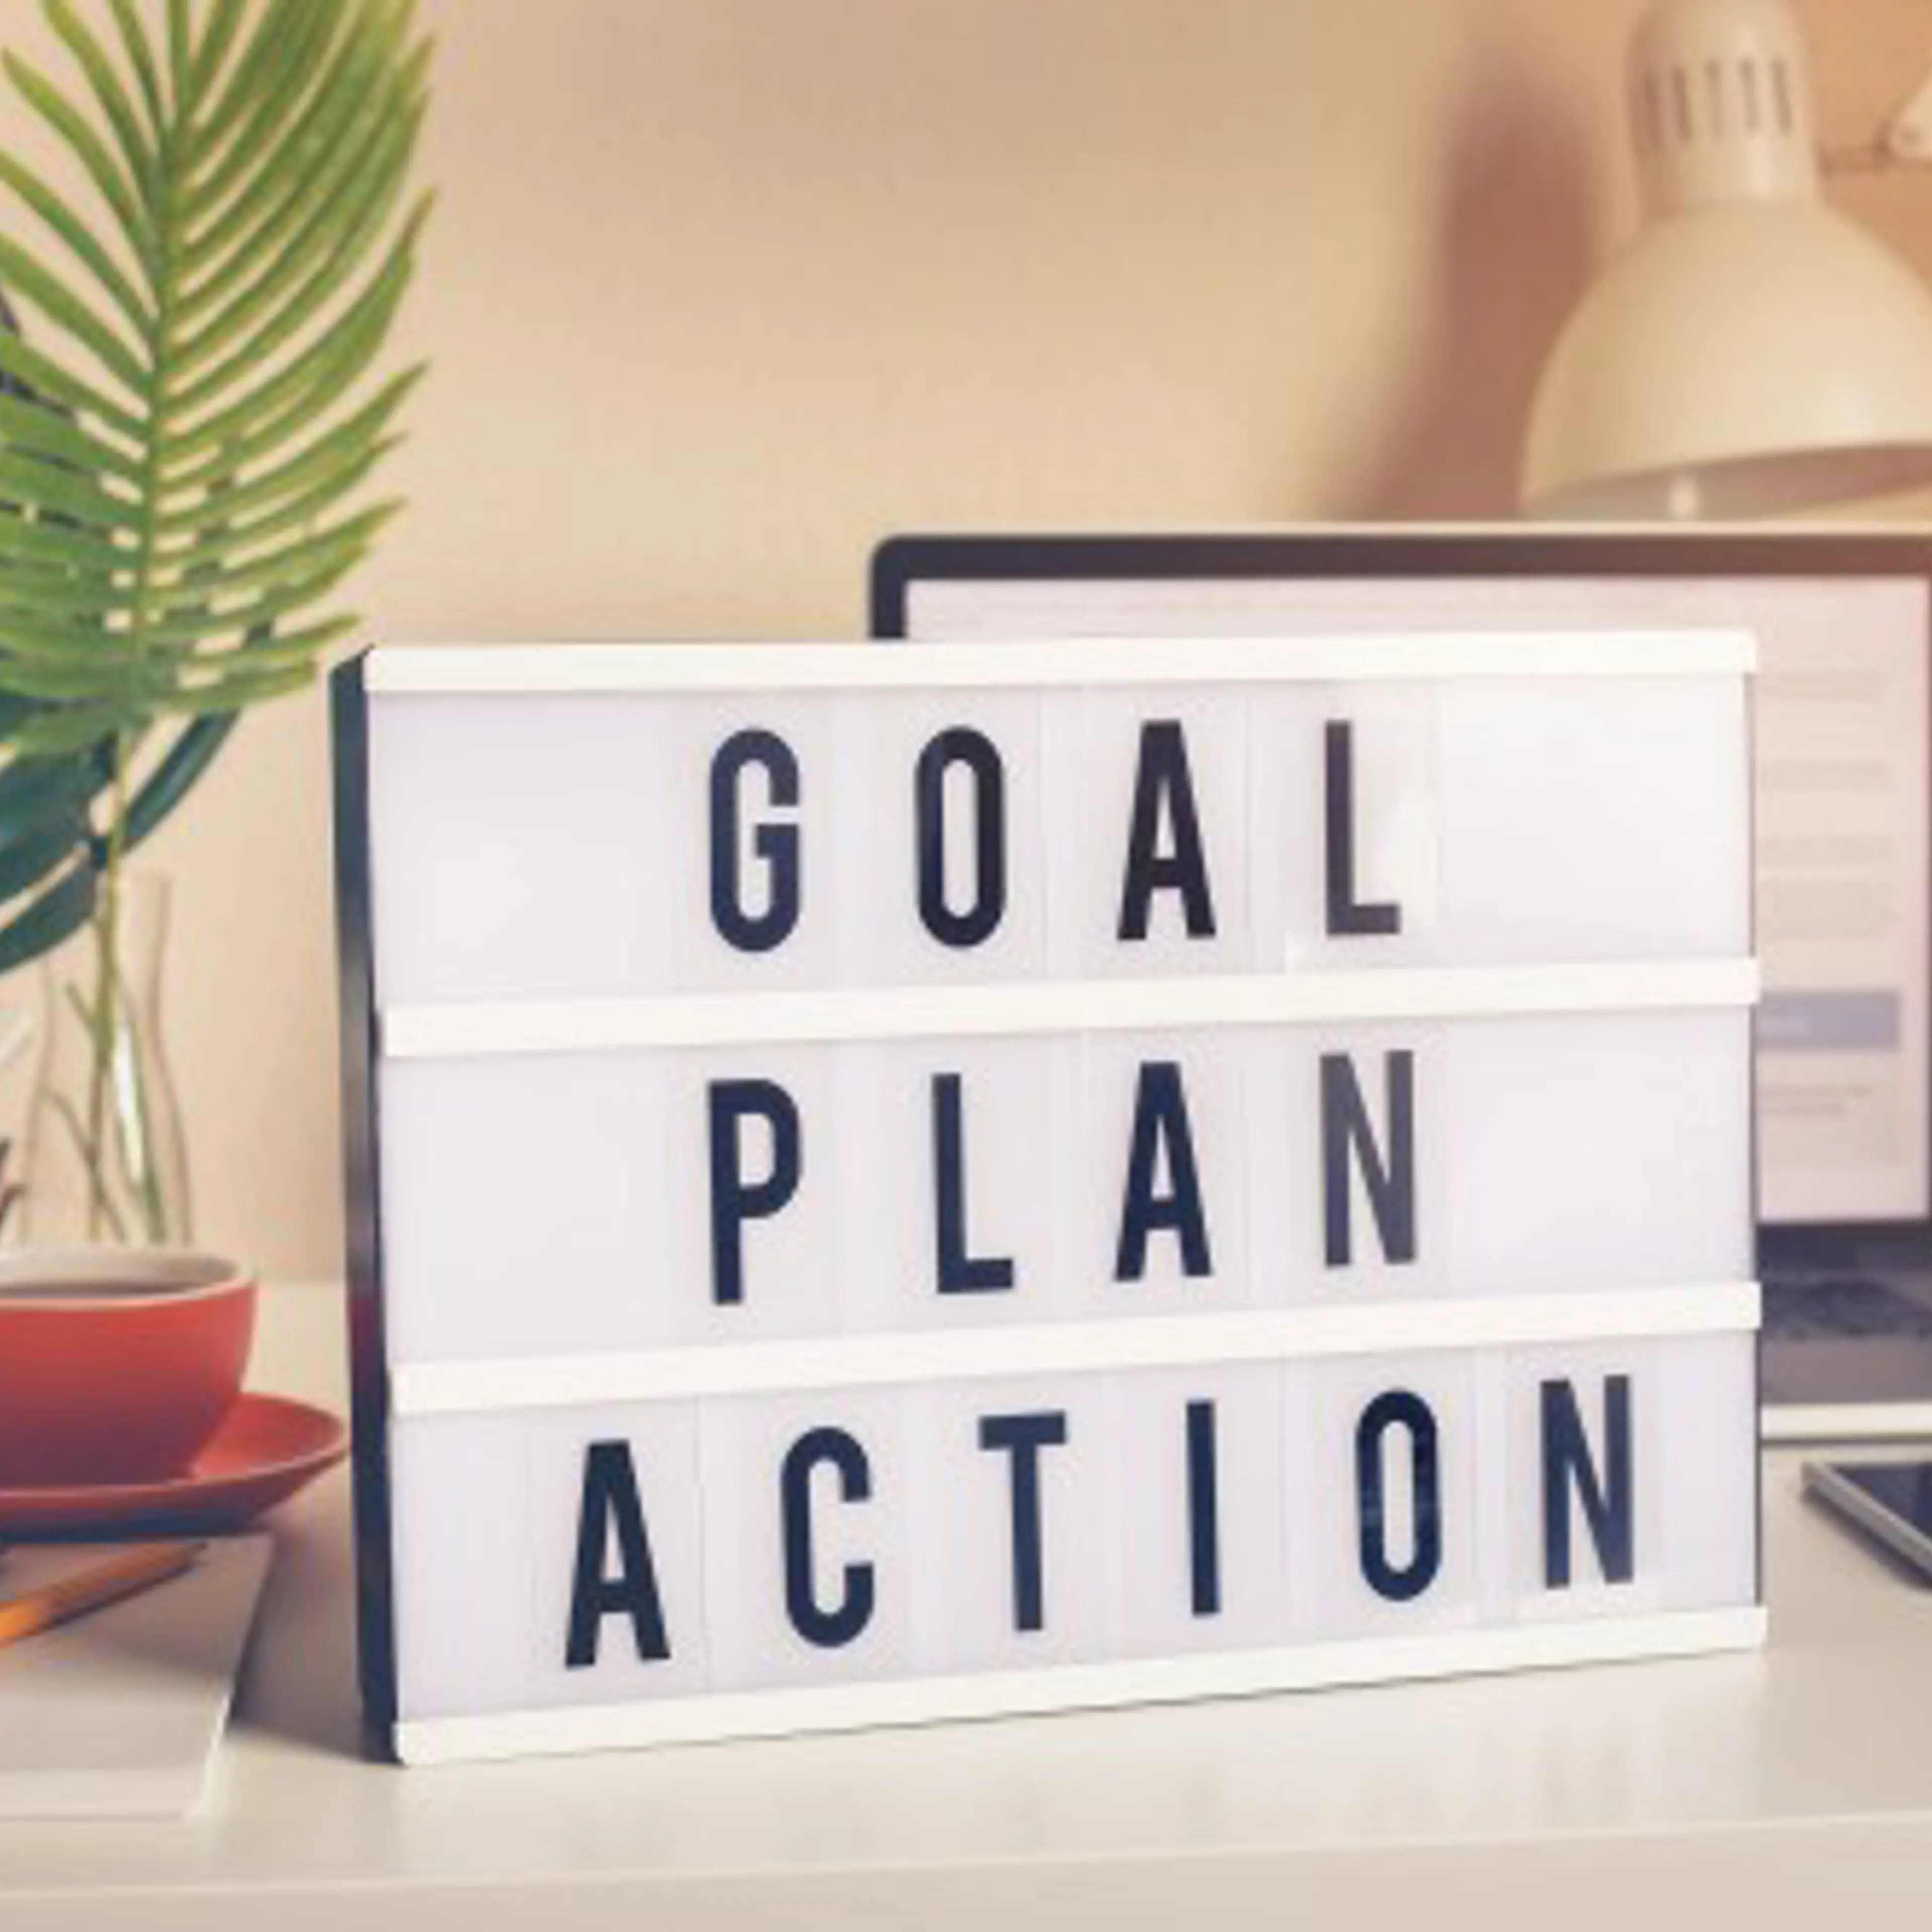 Picture of a sign saying: Goal, plan, action